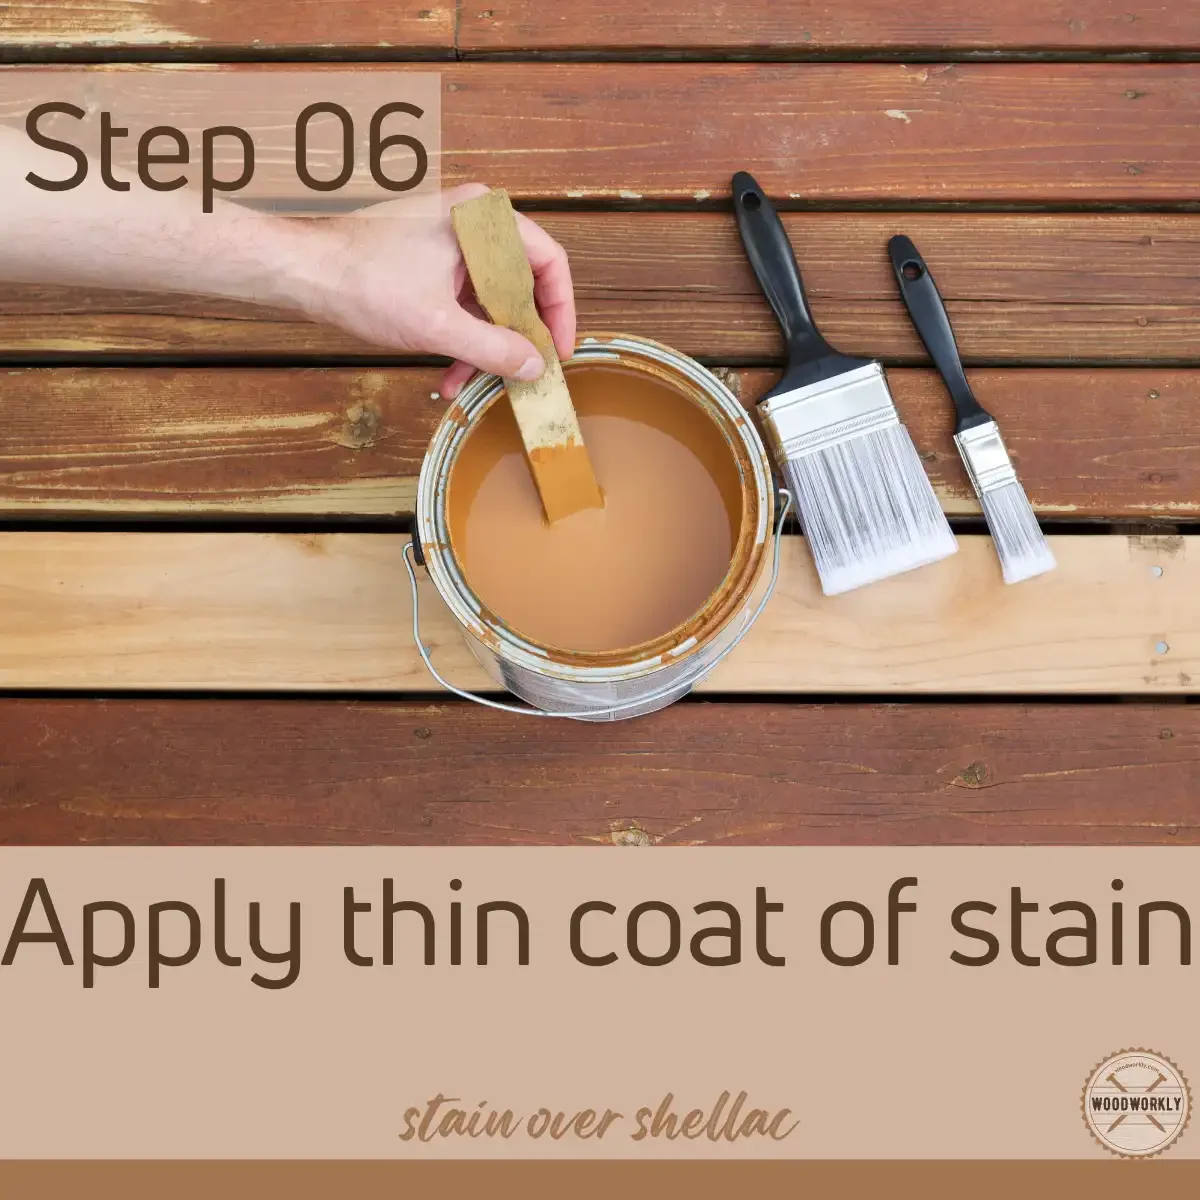 Apply wood stain over shellac